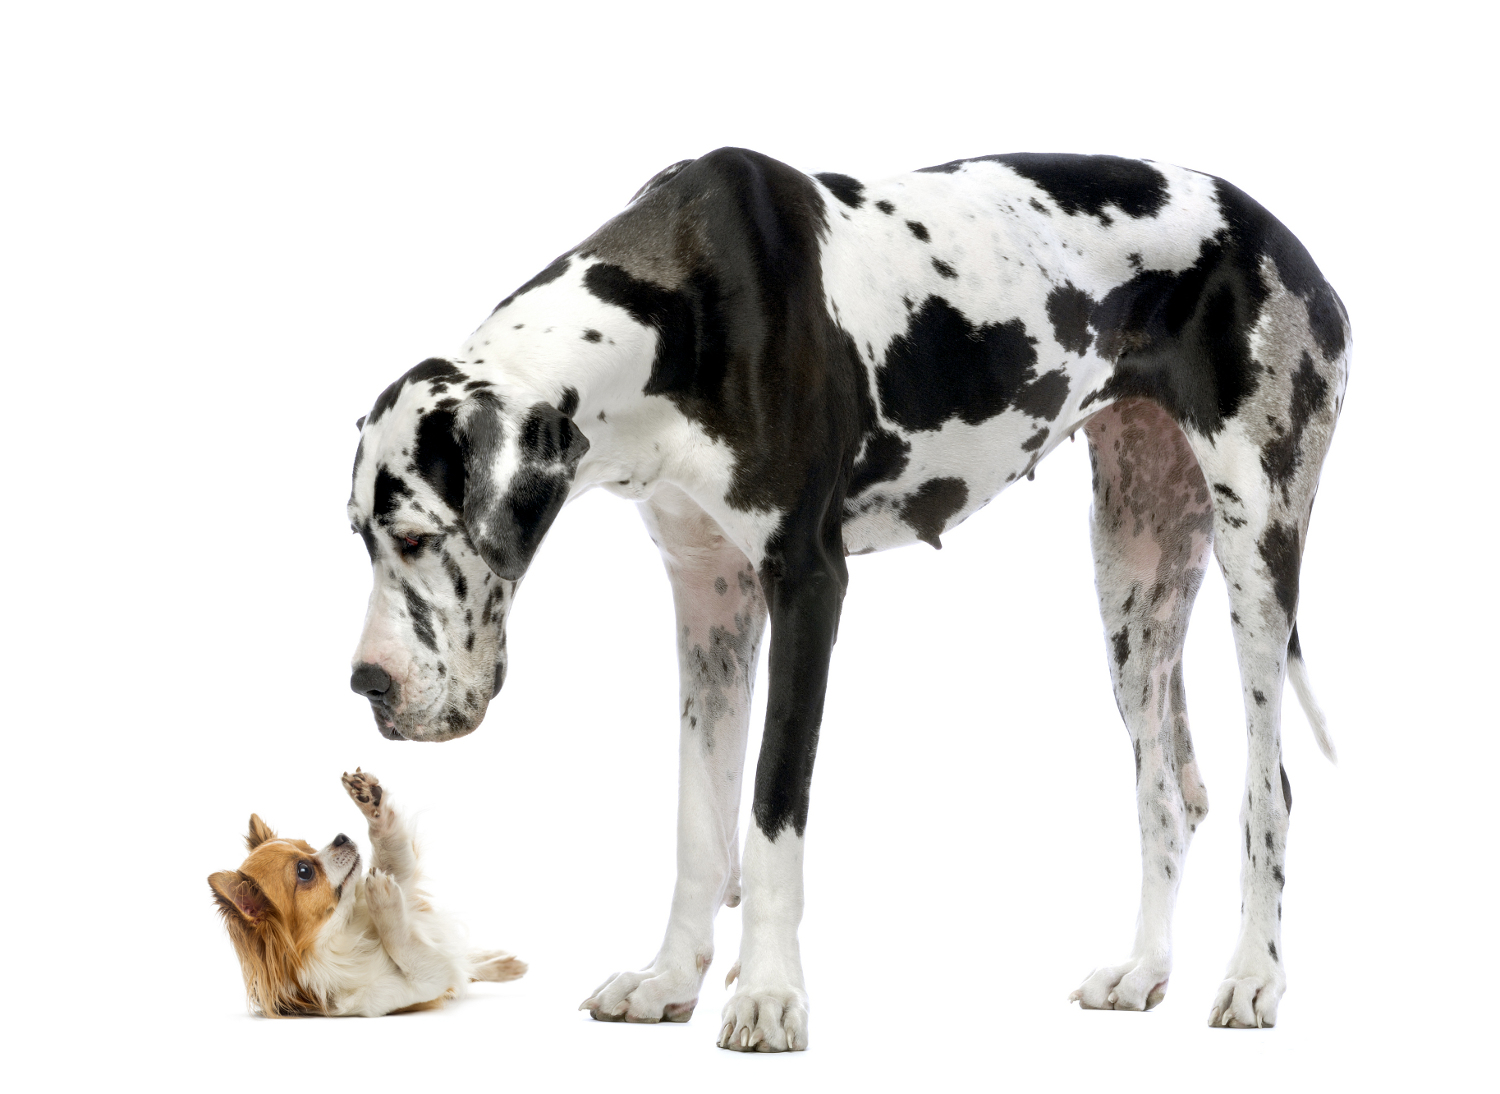 Great Dane and chihuahua, from Shutterstock